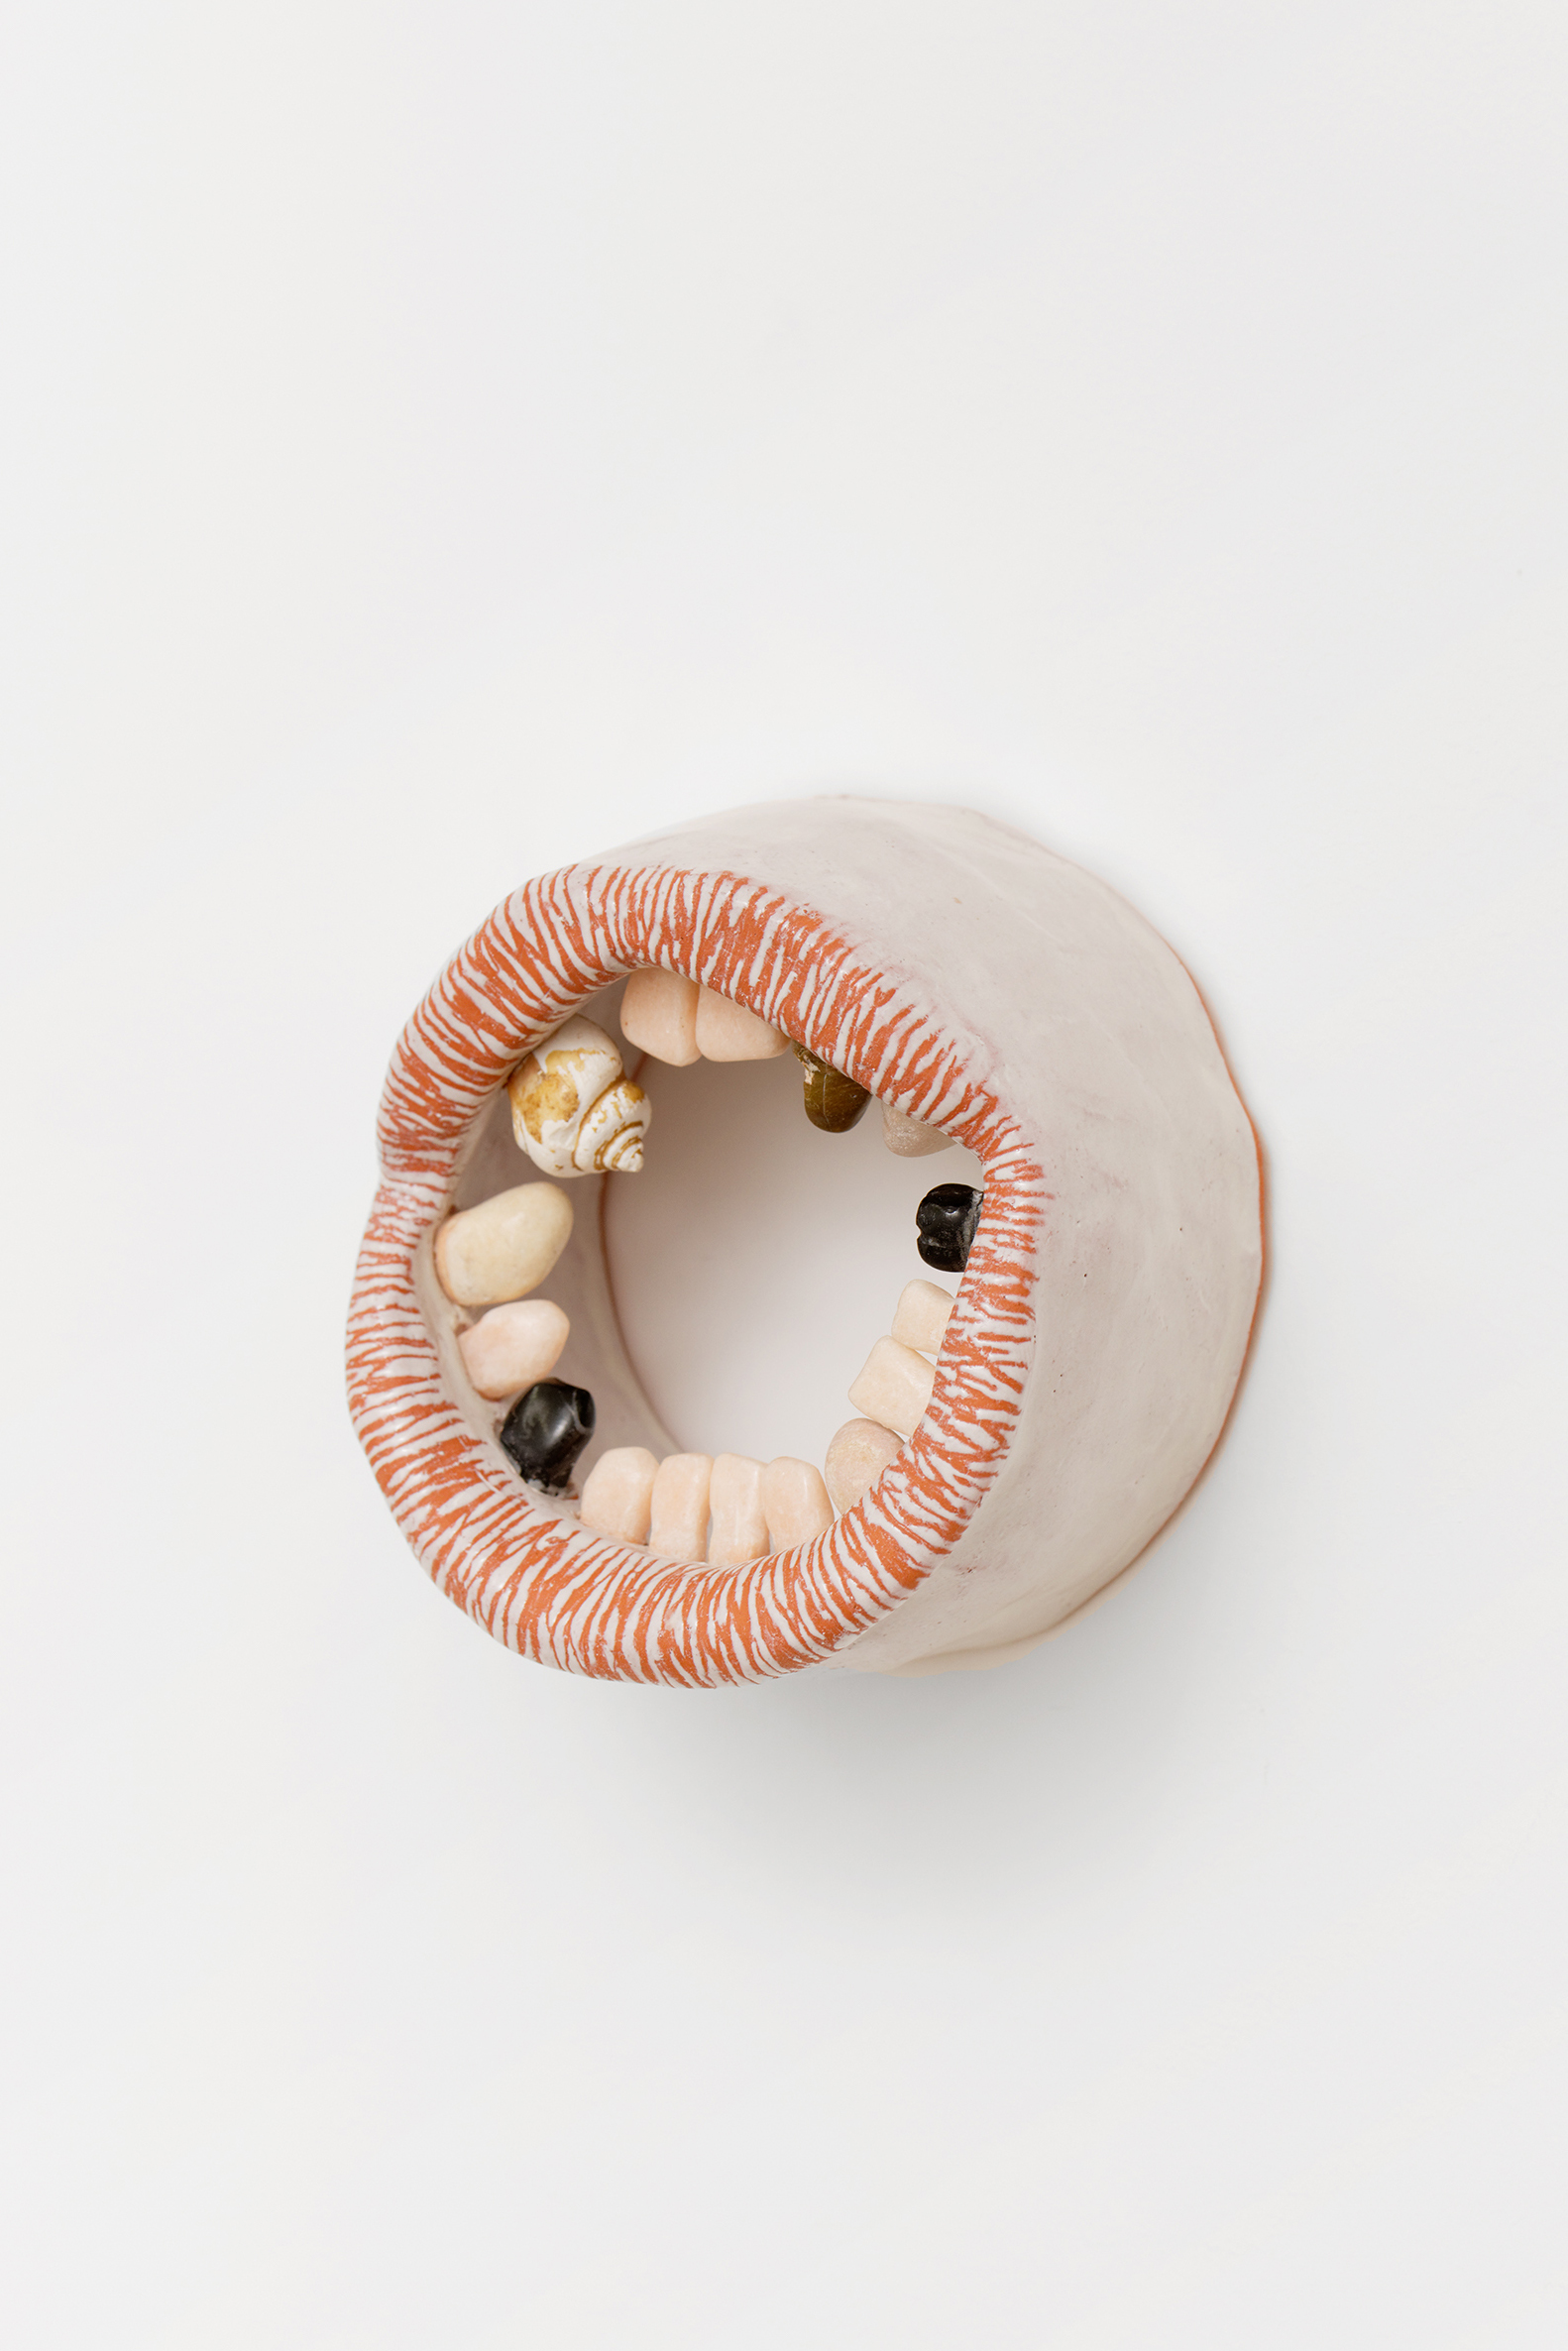 Lou Masduraud, Kiss (without health insurance but an anti-speciesist approach of the mouth as an environment), 2023, glazed ceramic, pink marble, black marble, rocks, sea shells and sea-polished glass, 12 x 12 x 7 cm, unique